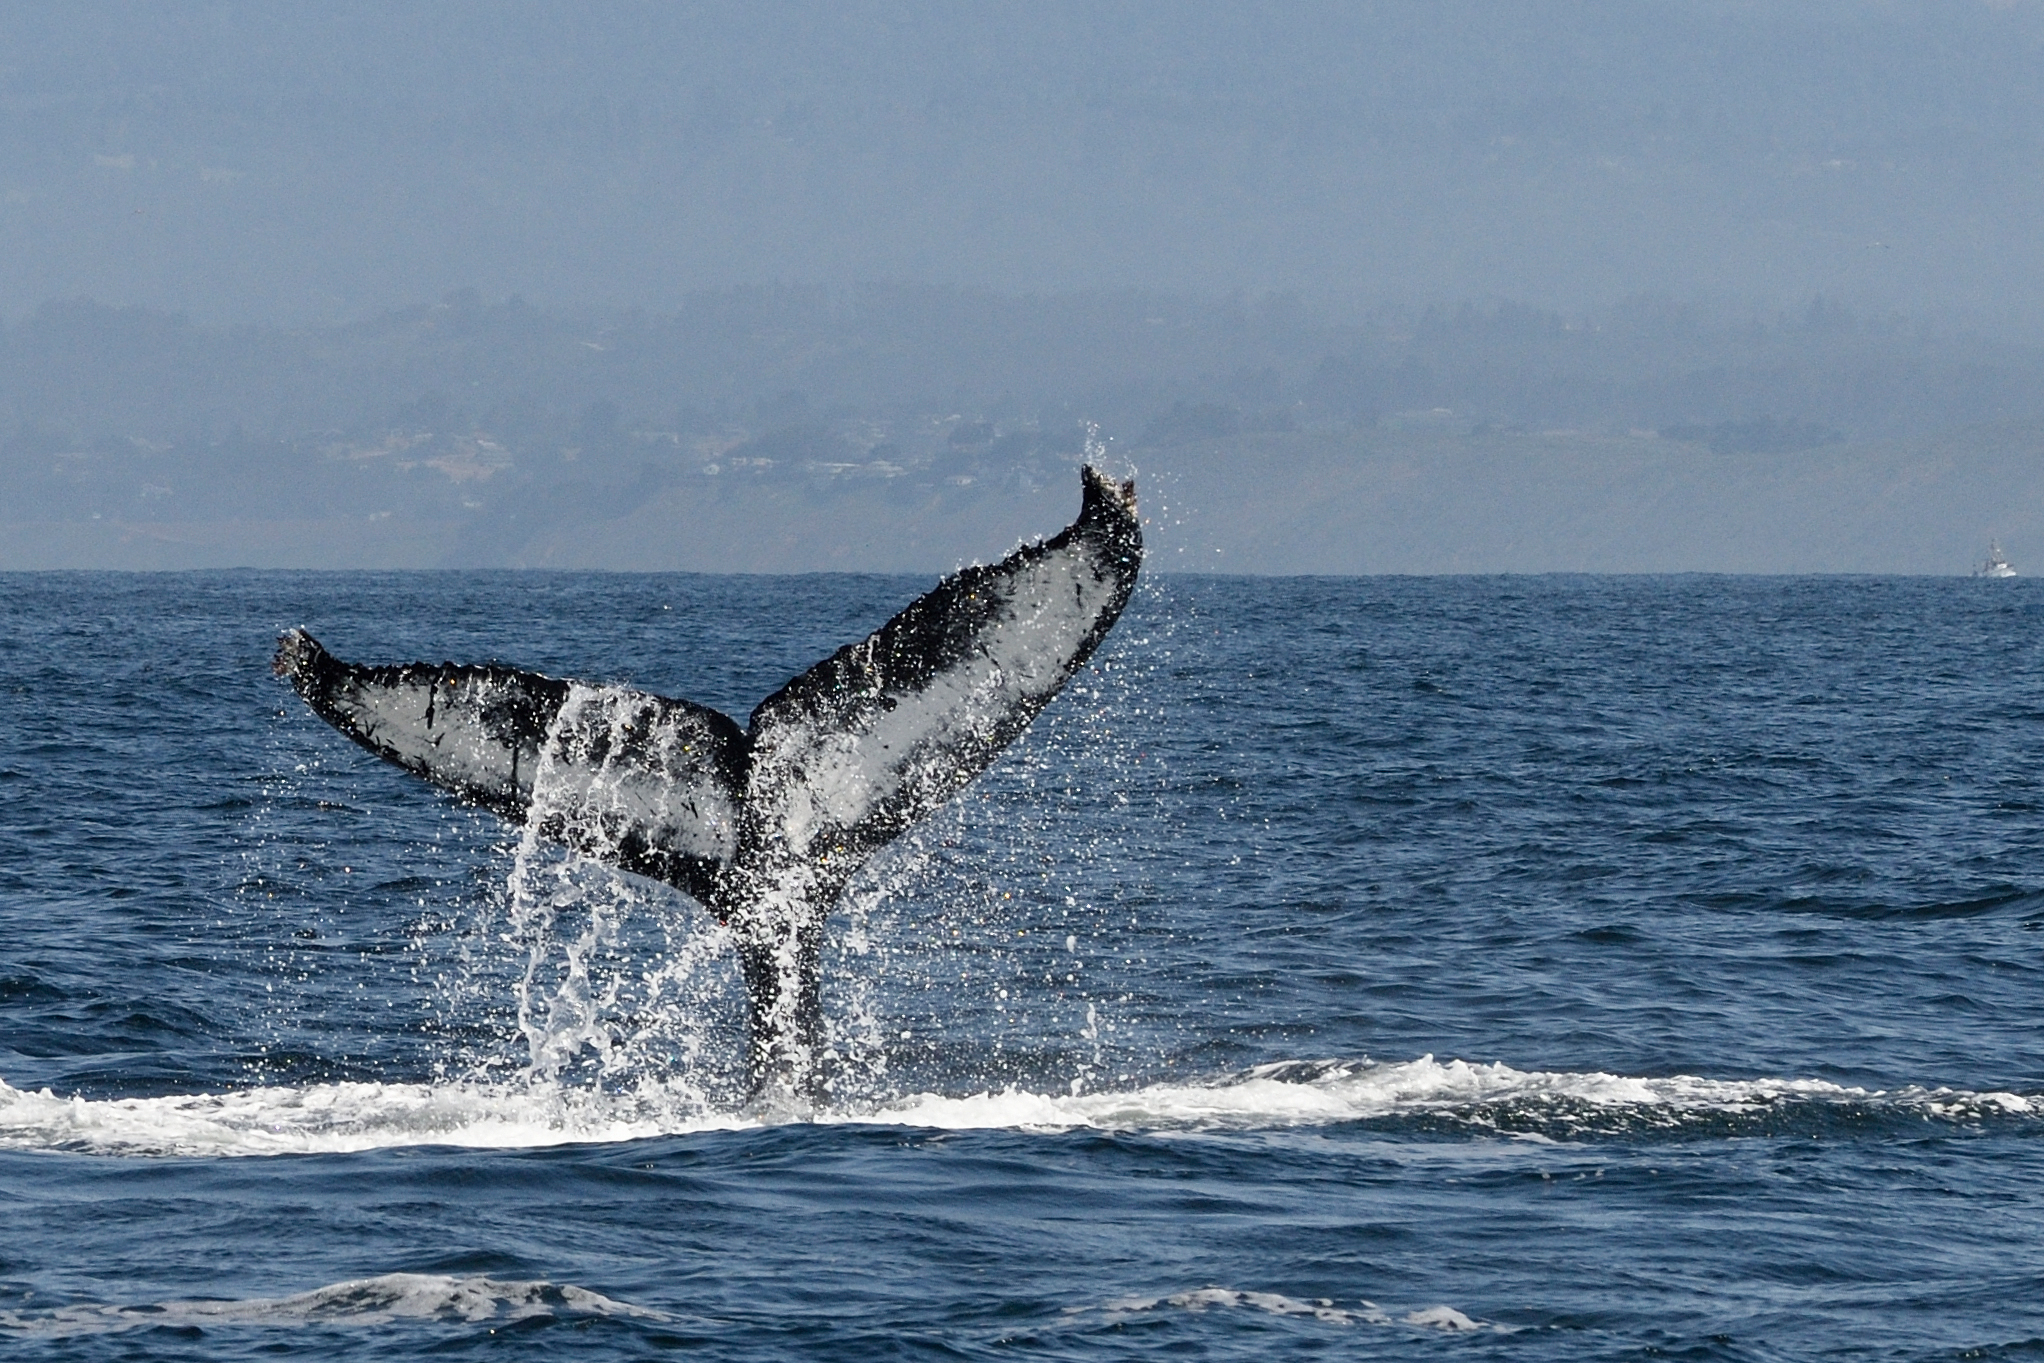 whale watching tour orange county